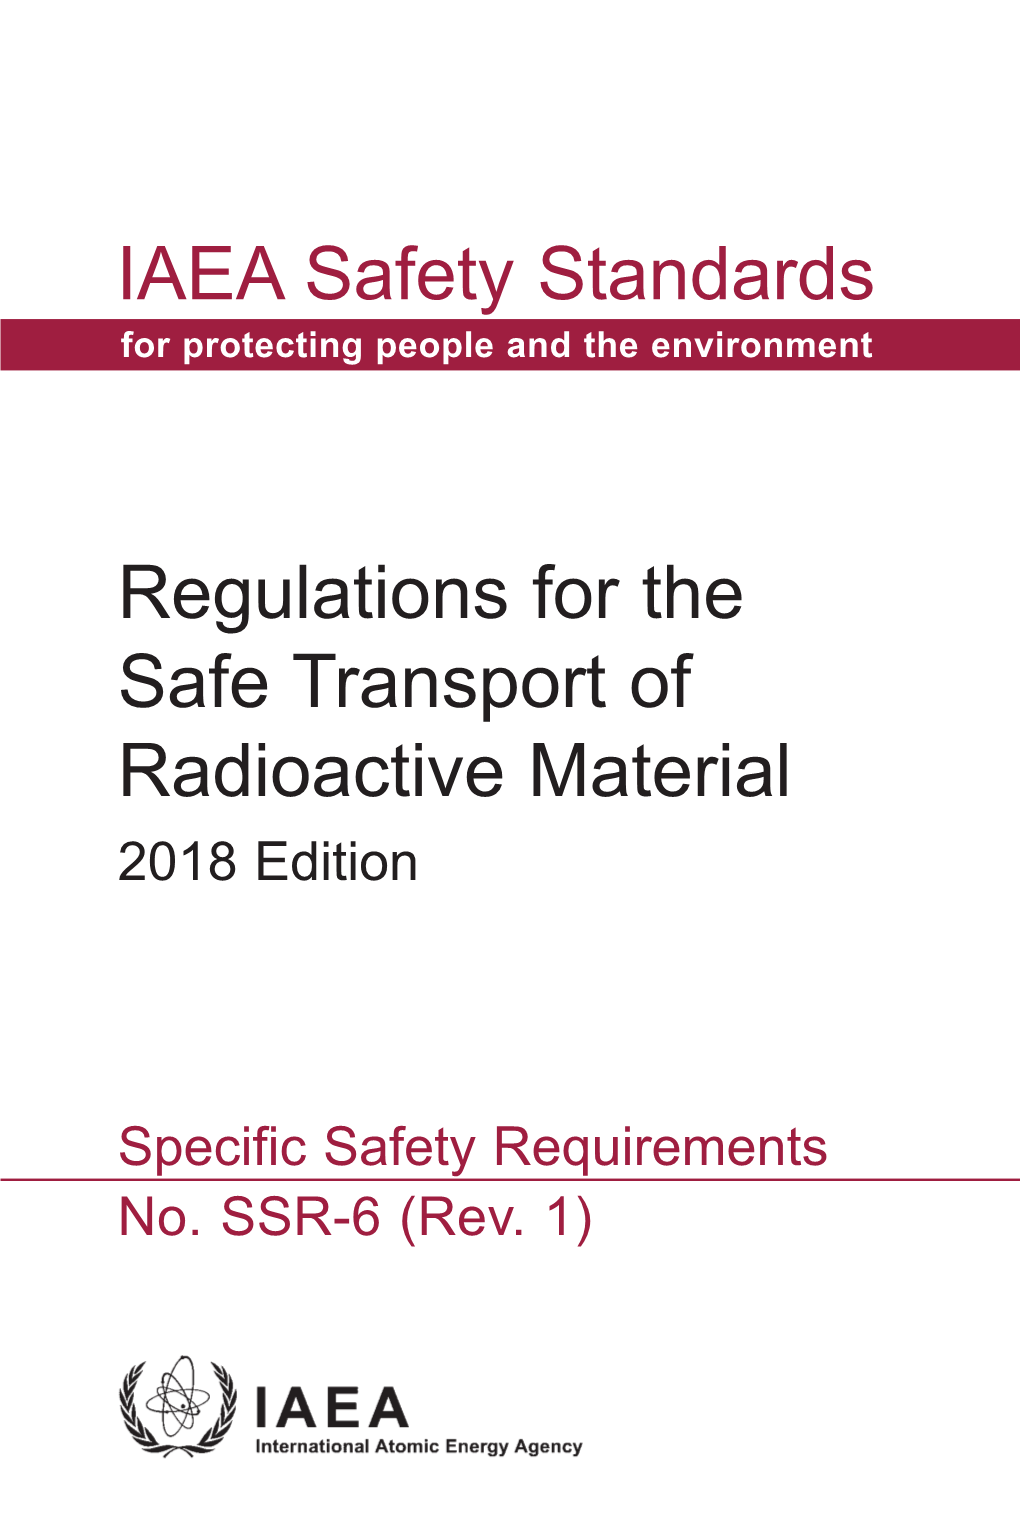 IAEA Safety Standards Regulations for the Safe Transport of Radioactive